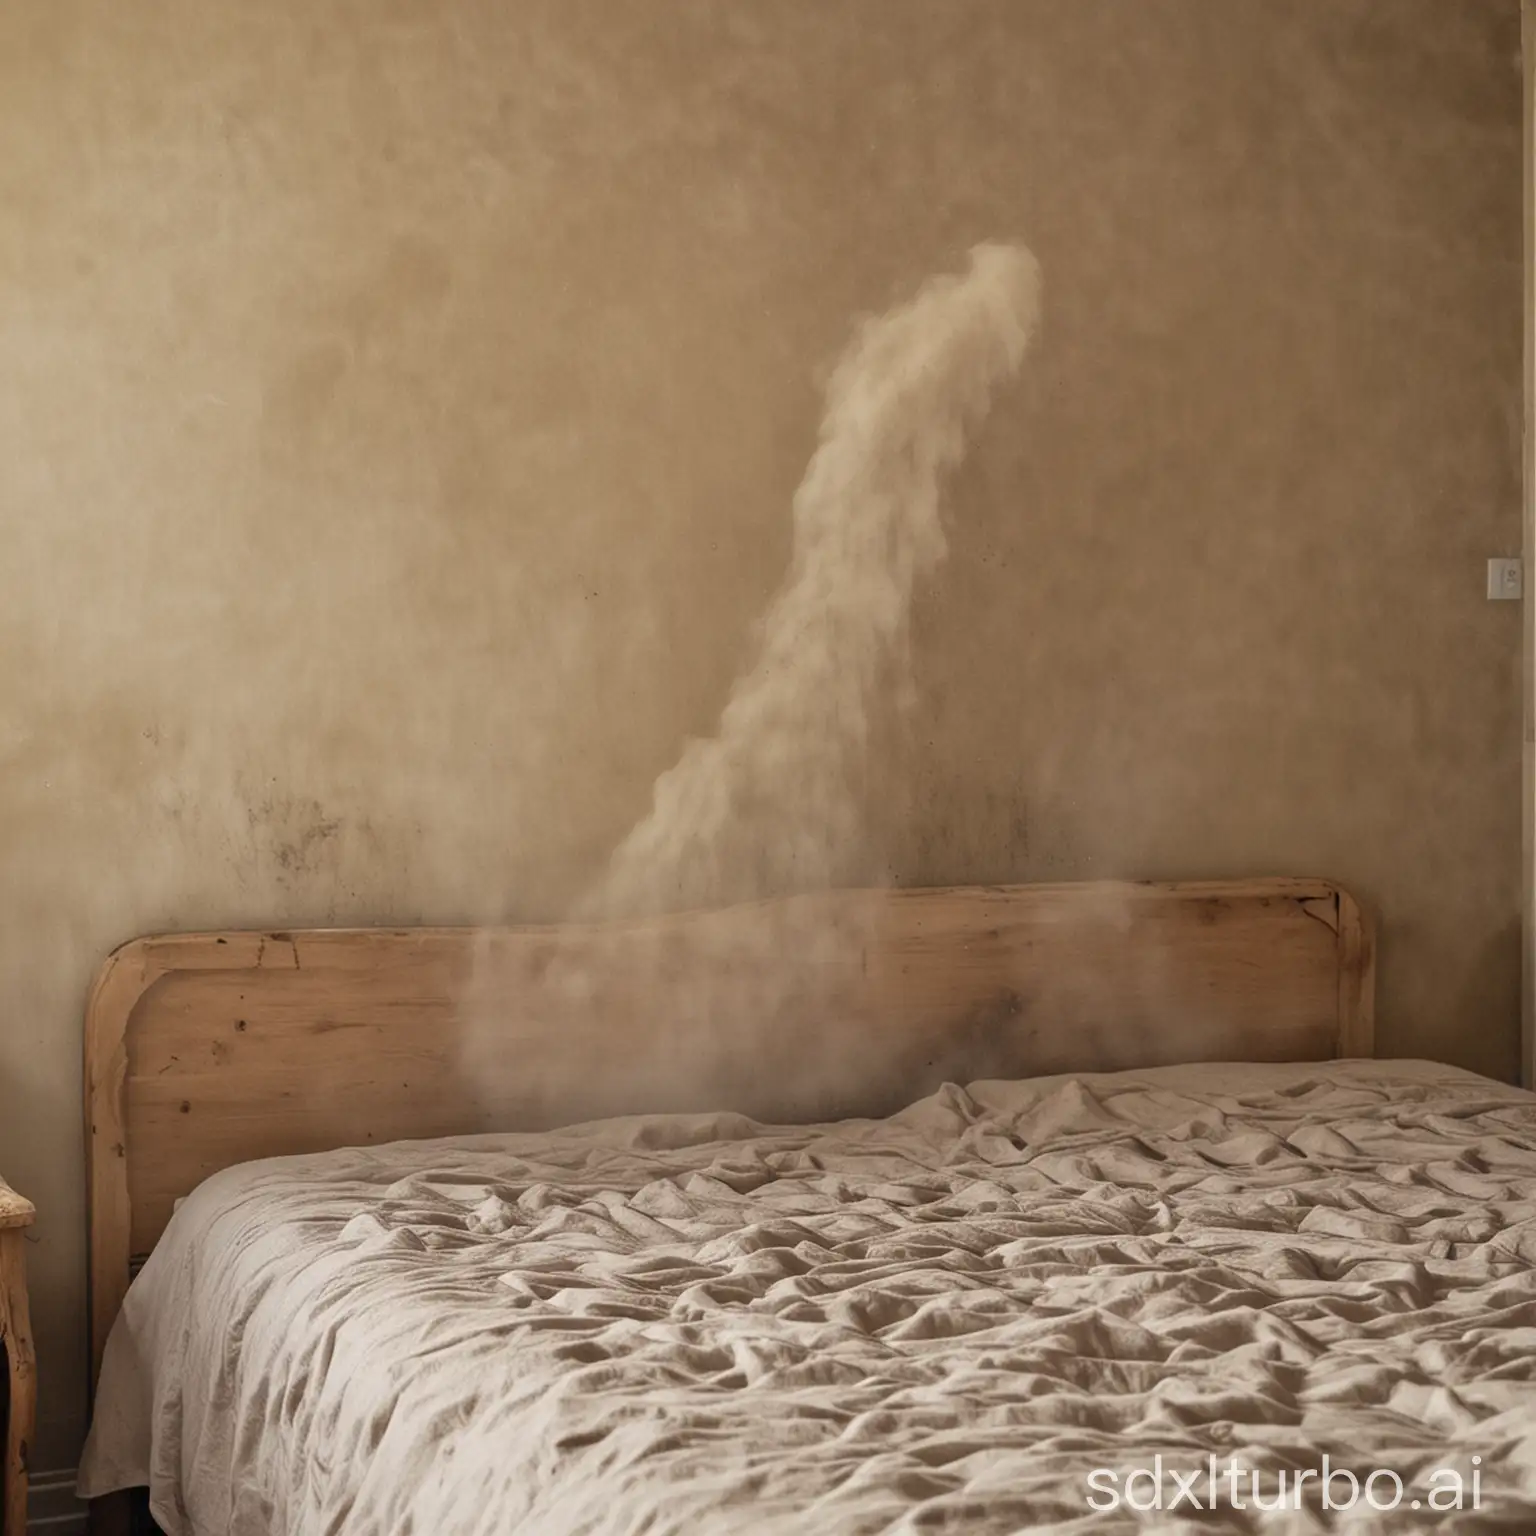 Tranquil-Dust-Particles-in-a-Bedroom-Setting